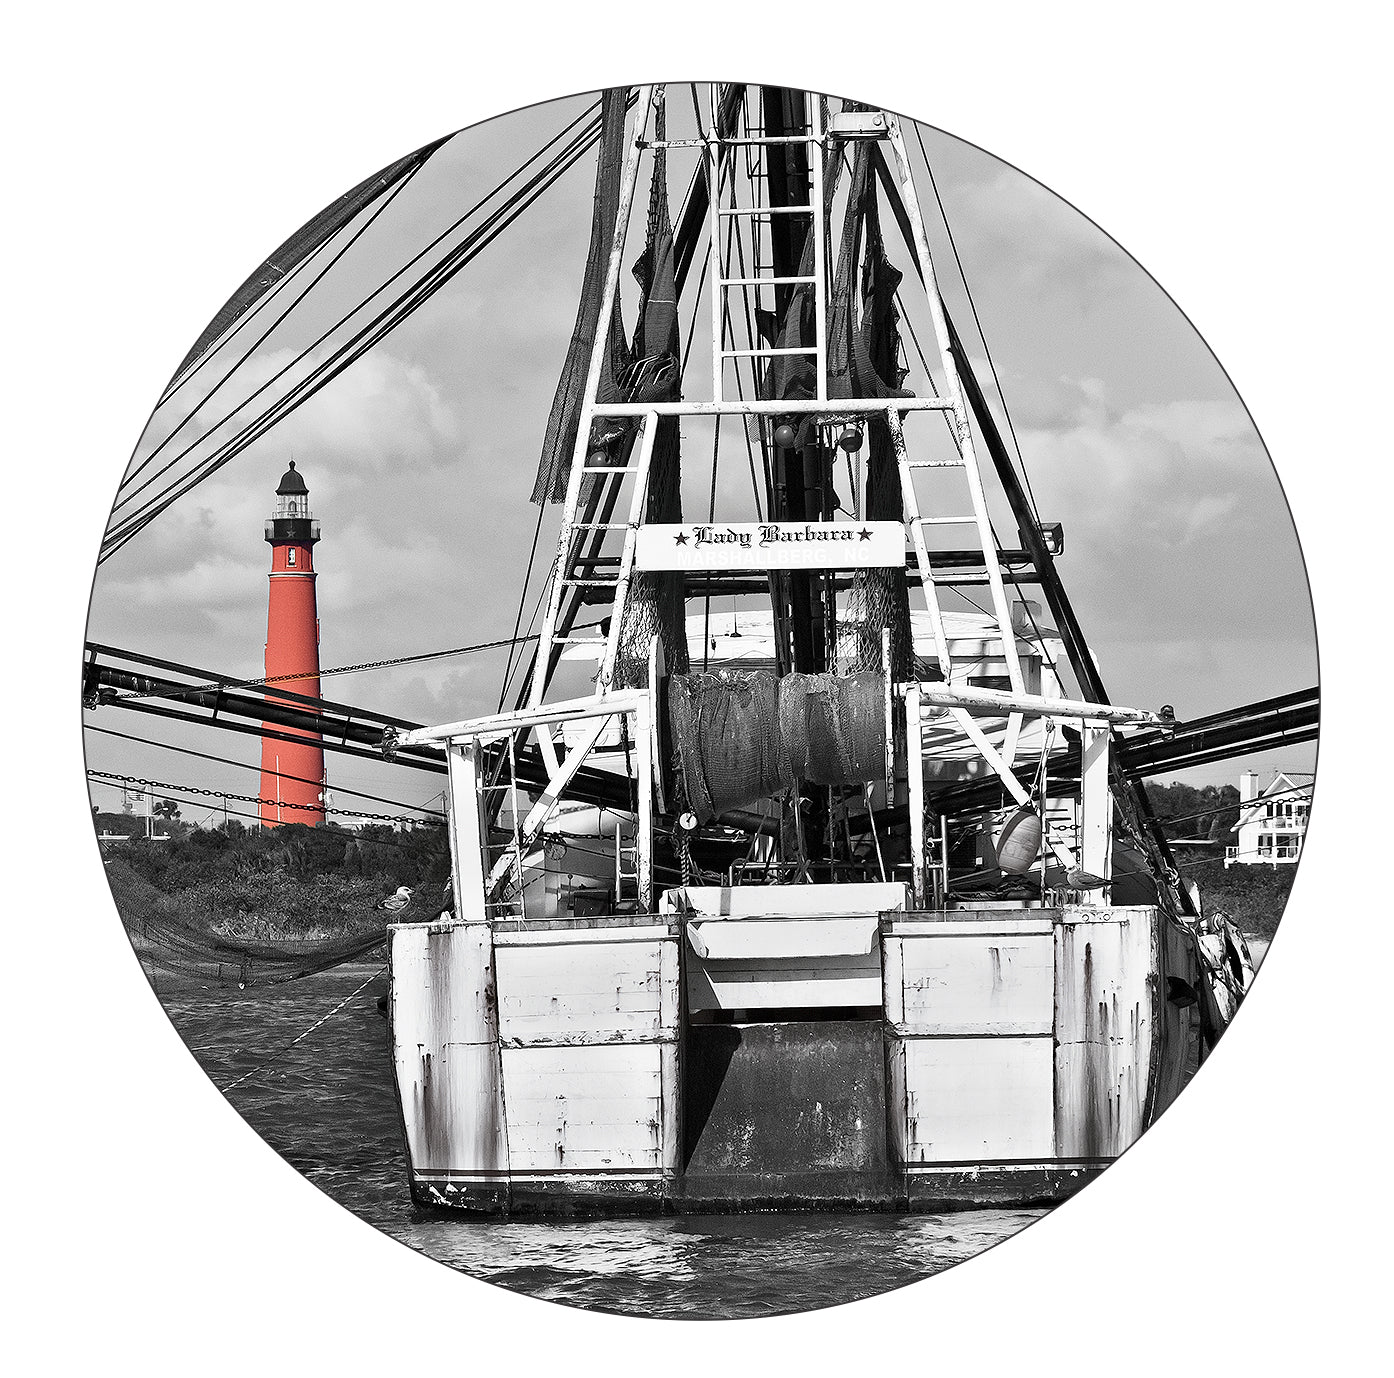 4" Round Rubber Home Coaster with image of Ponce Inlet Lighthouse with Lady Barbara Shrimp Boat